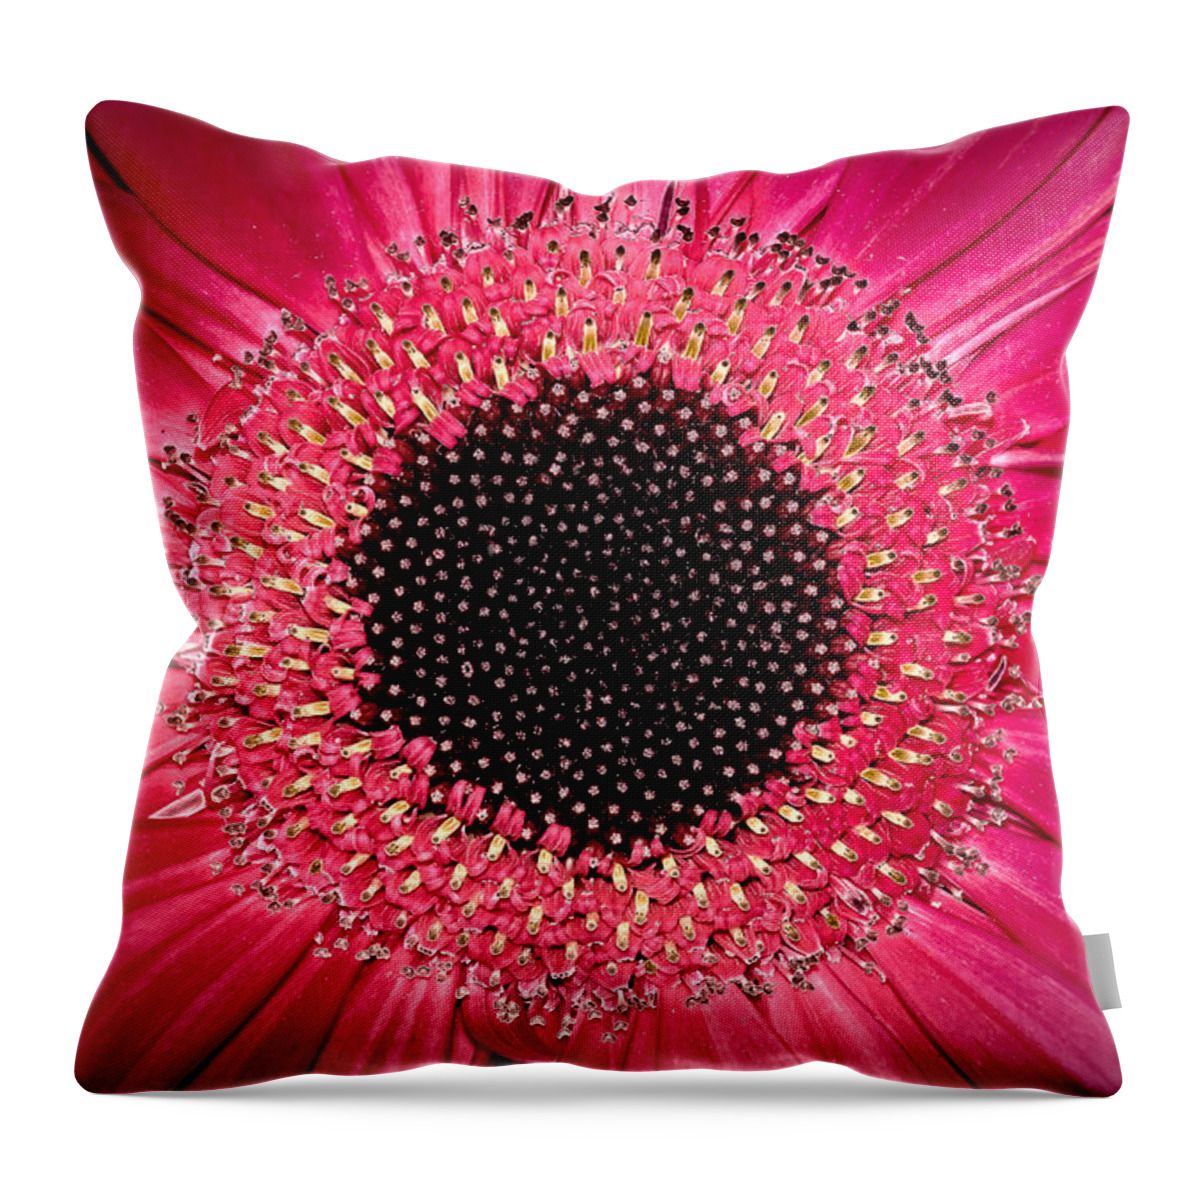 Flower Throw Pillow featuring the photograph Gerbera by Andreas Freund